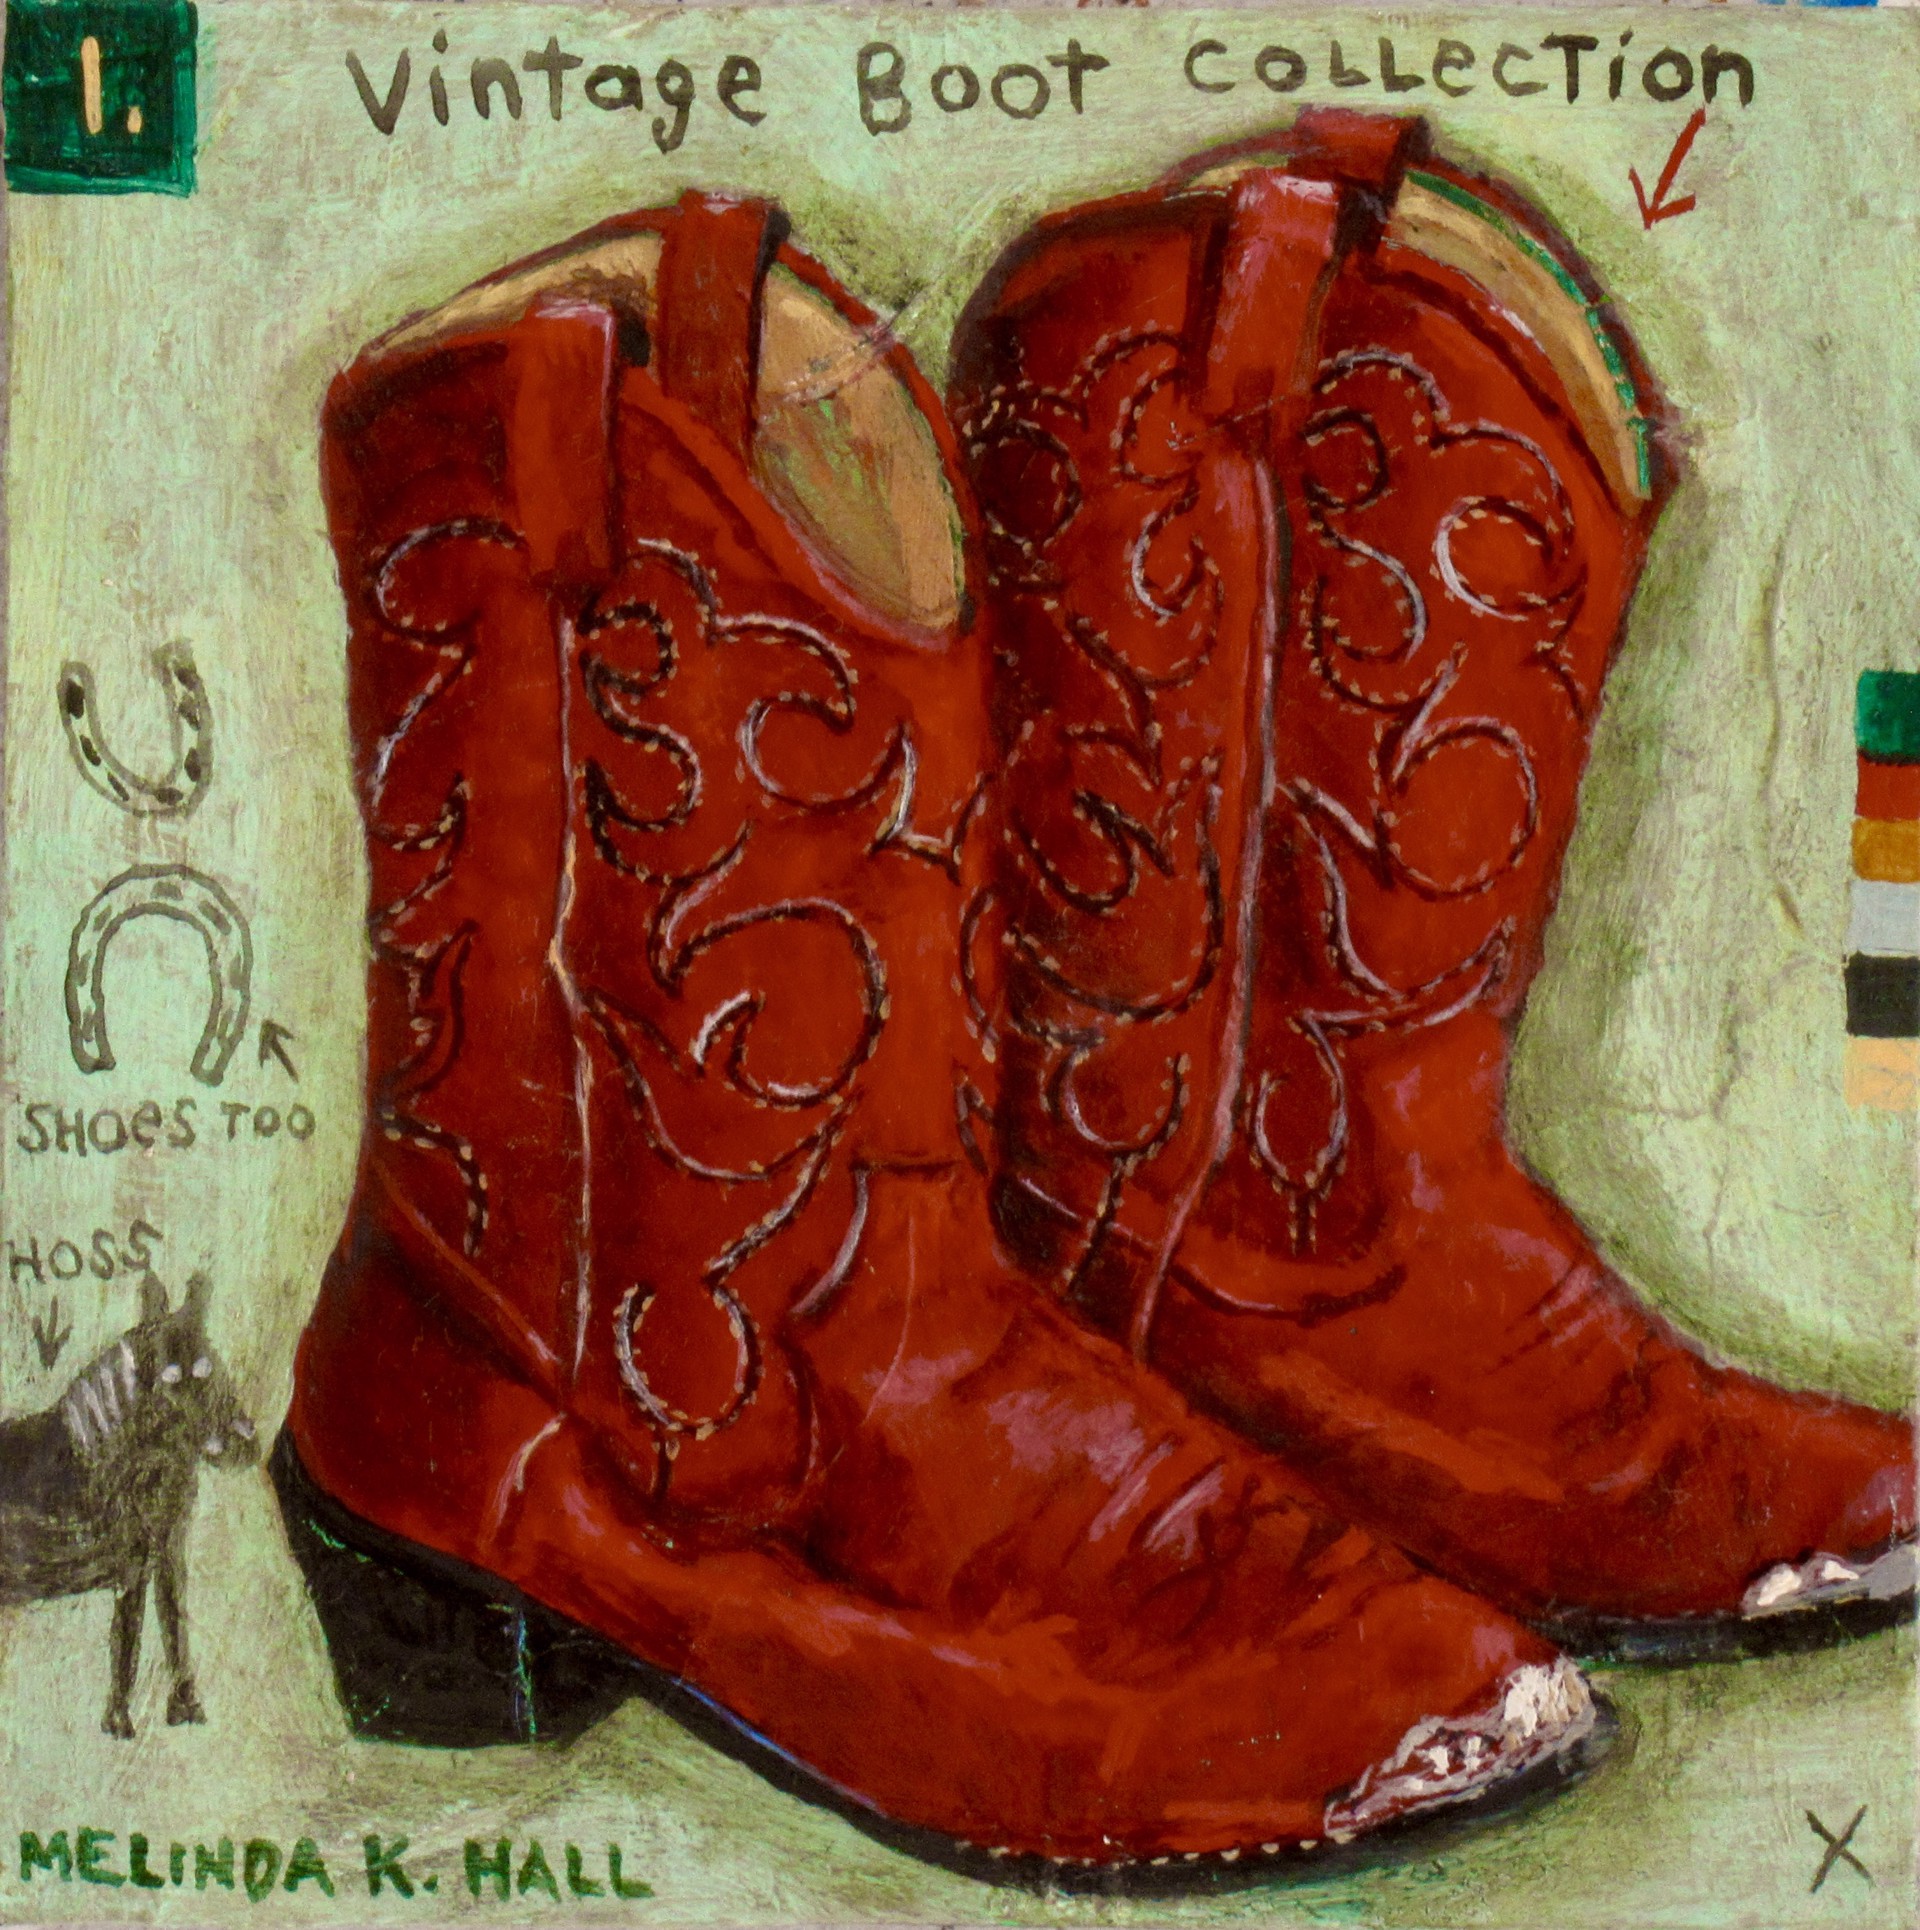 Vintage Boot Collection #1 by Melinda K. Hall